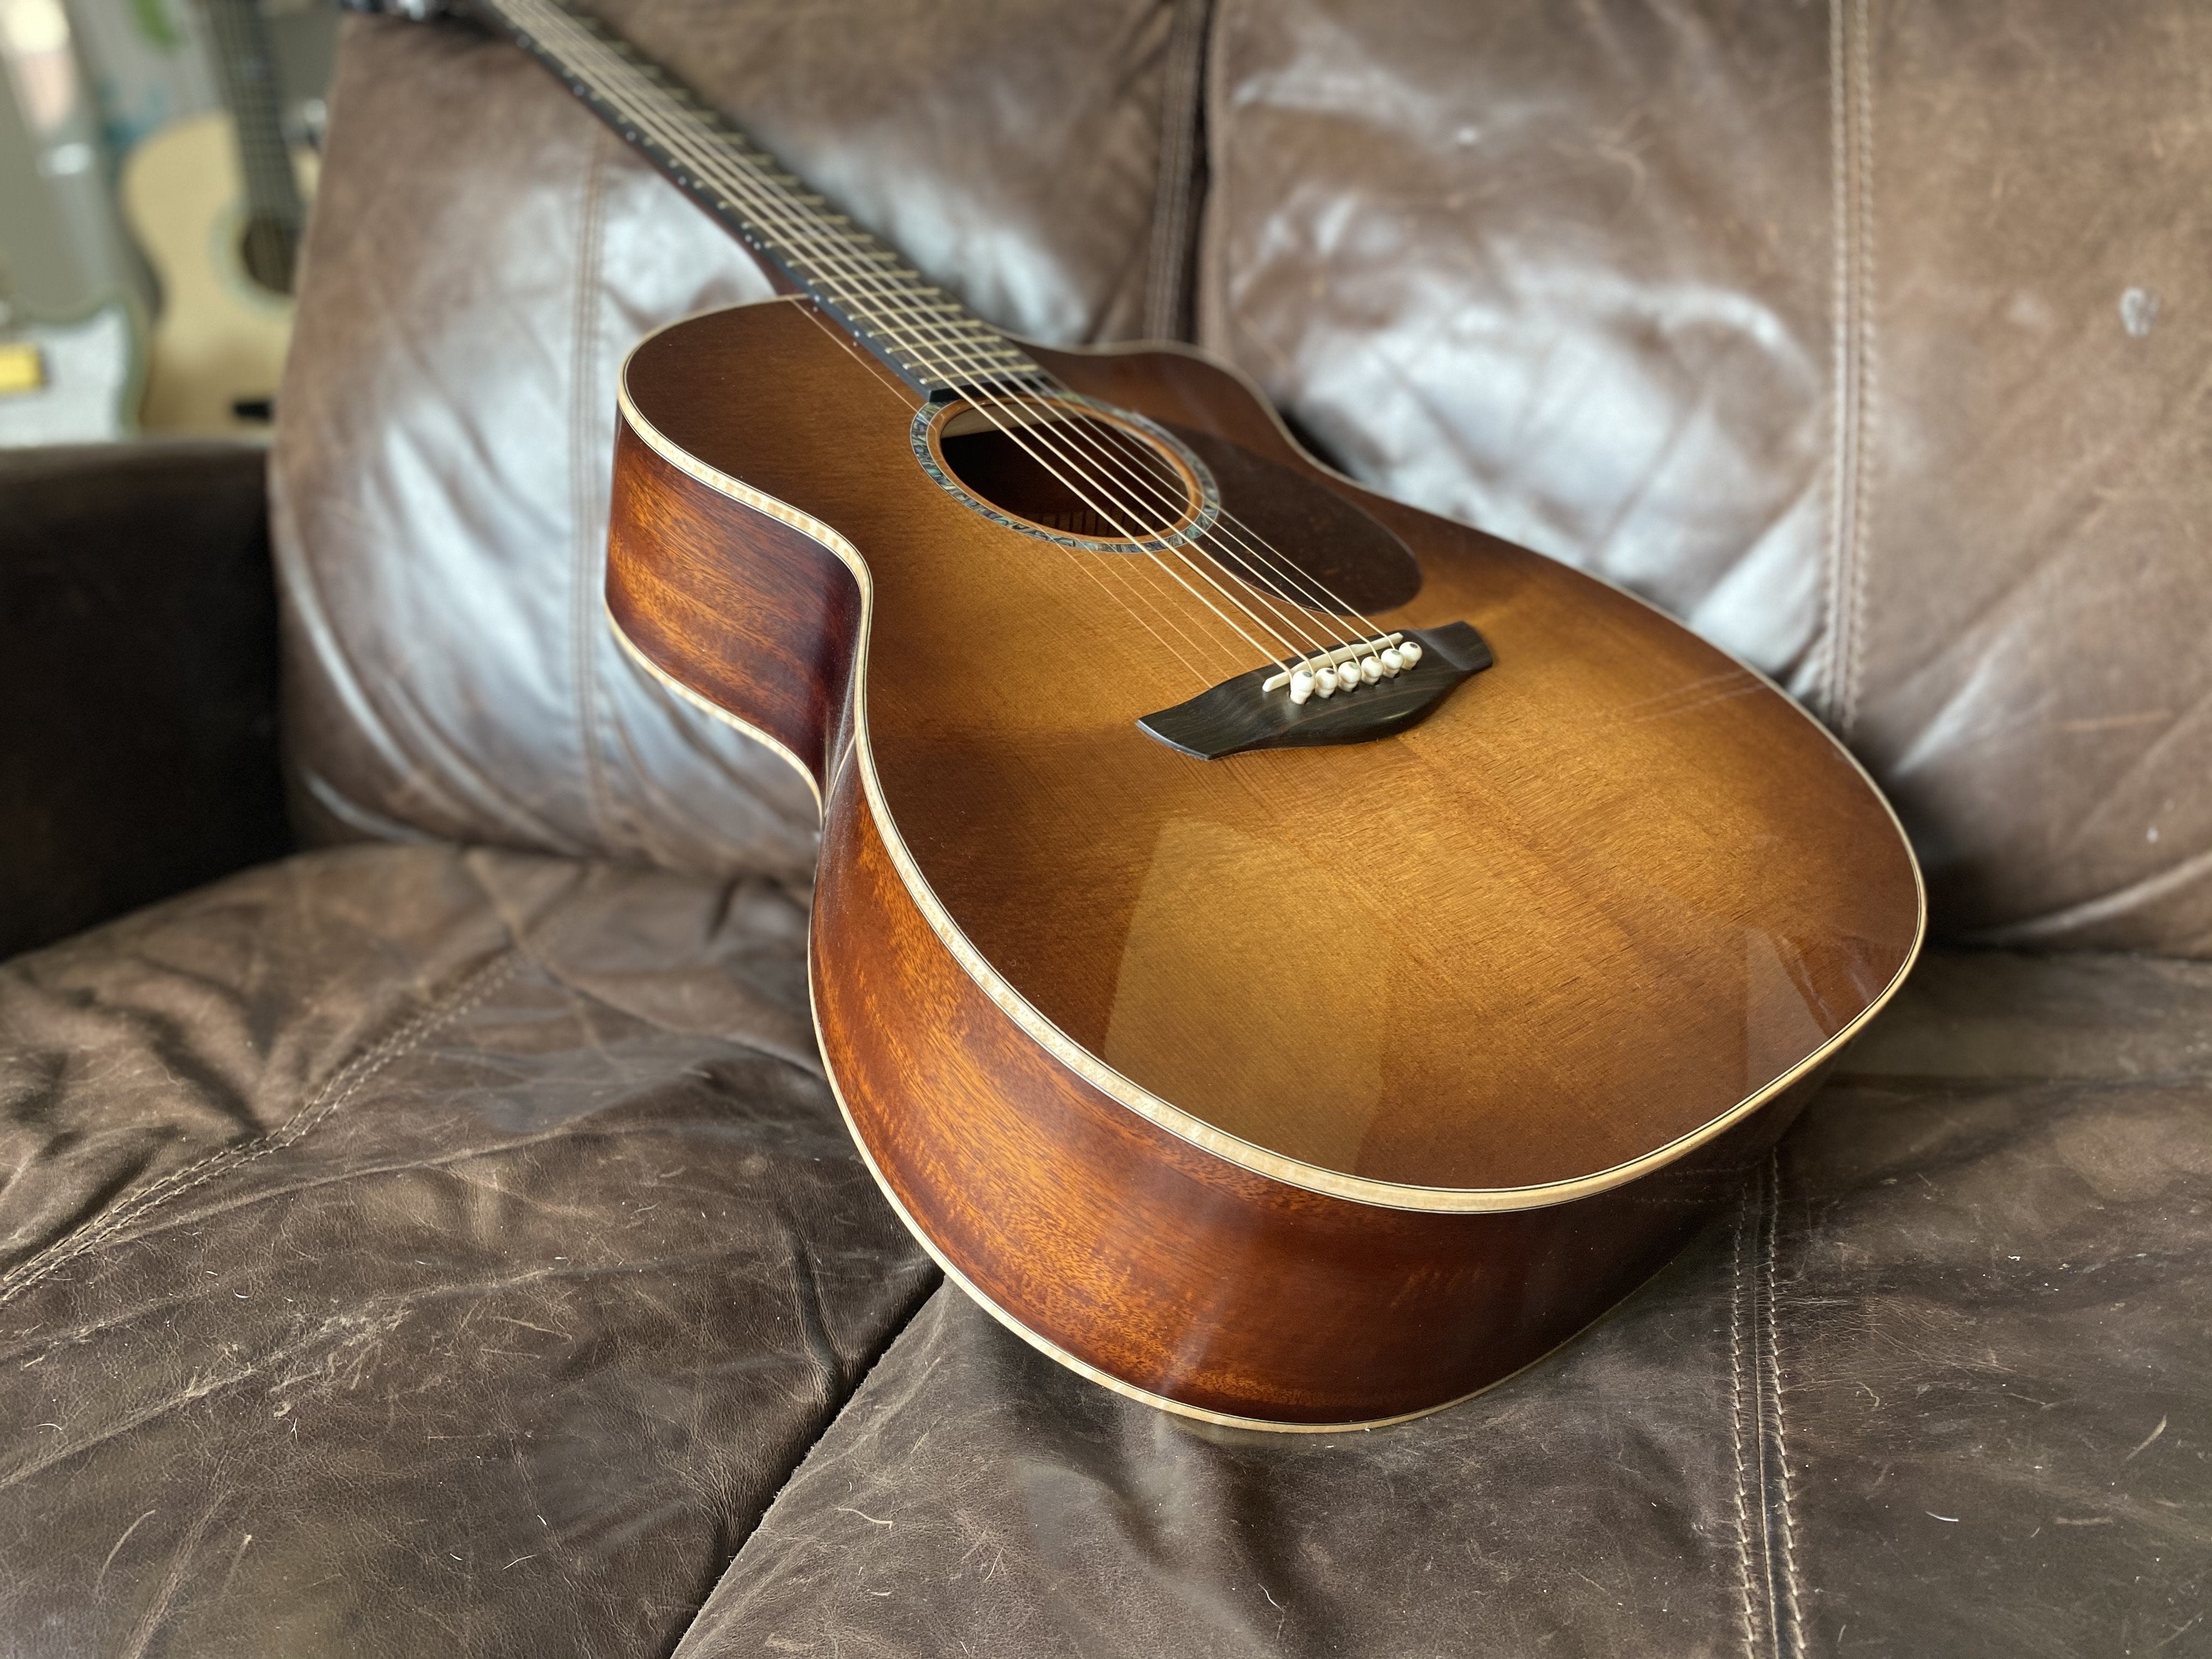 Faith Monarch Earth By Patrick James Eggle, Acoustic Guitar for sale at Richards Guitars.